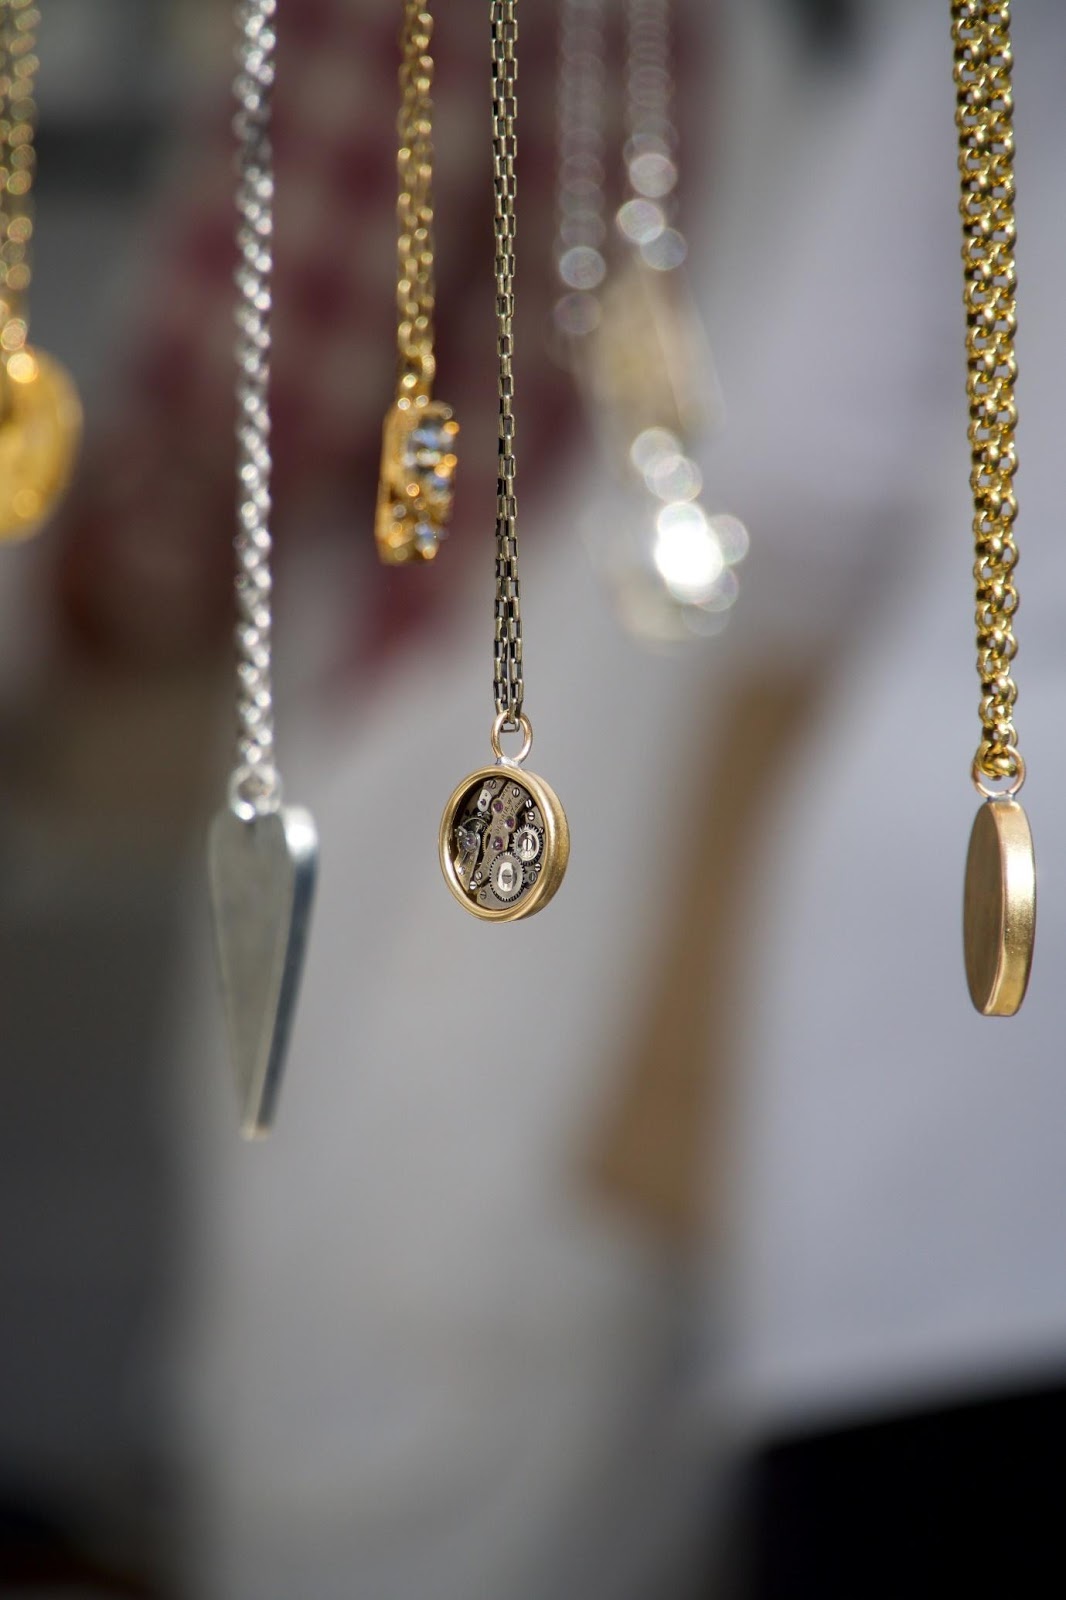 Why your jewelry photographs don’t come out as imagined